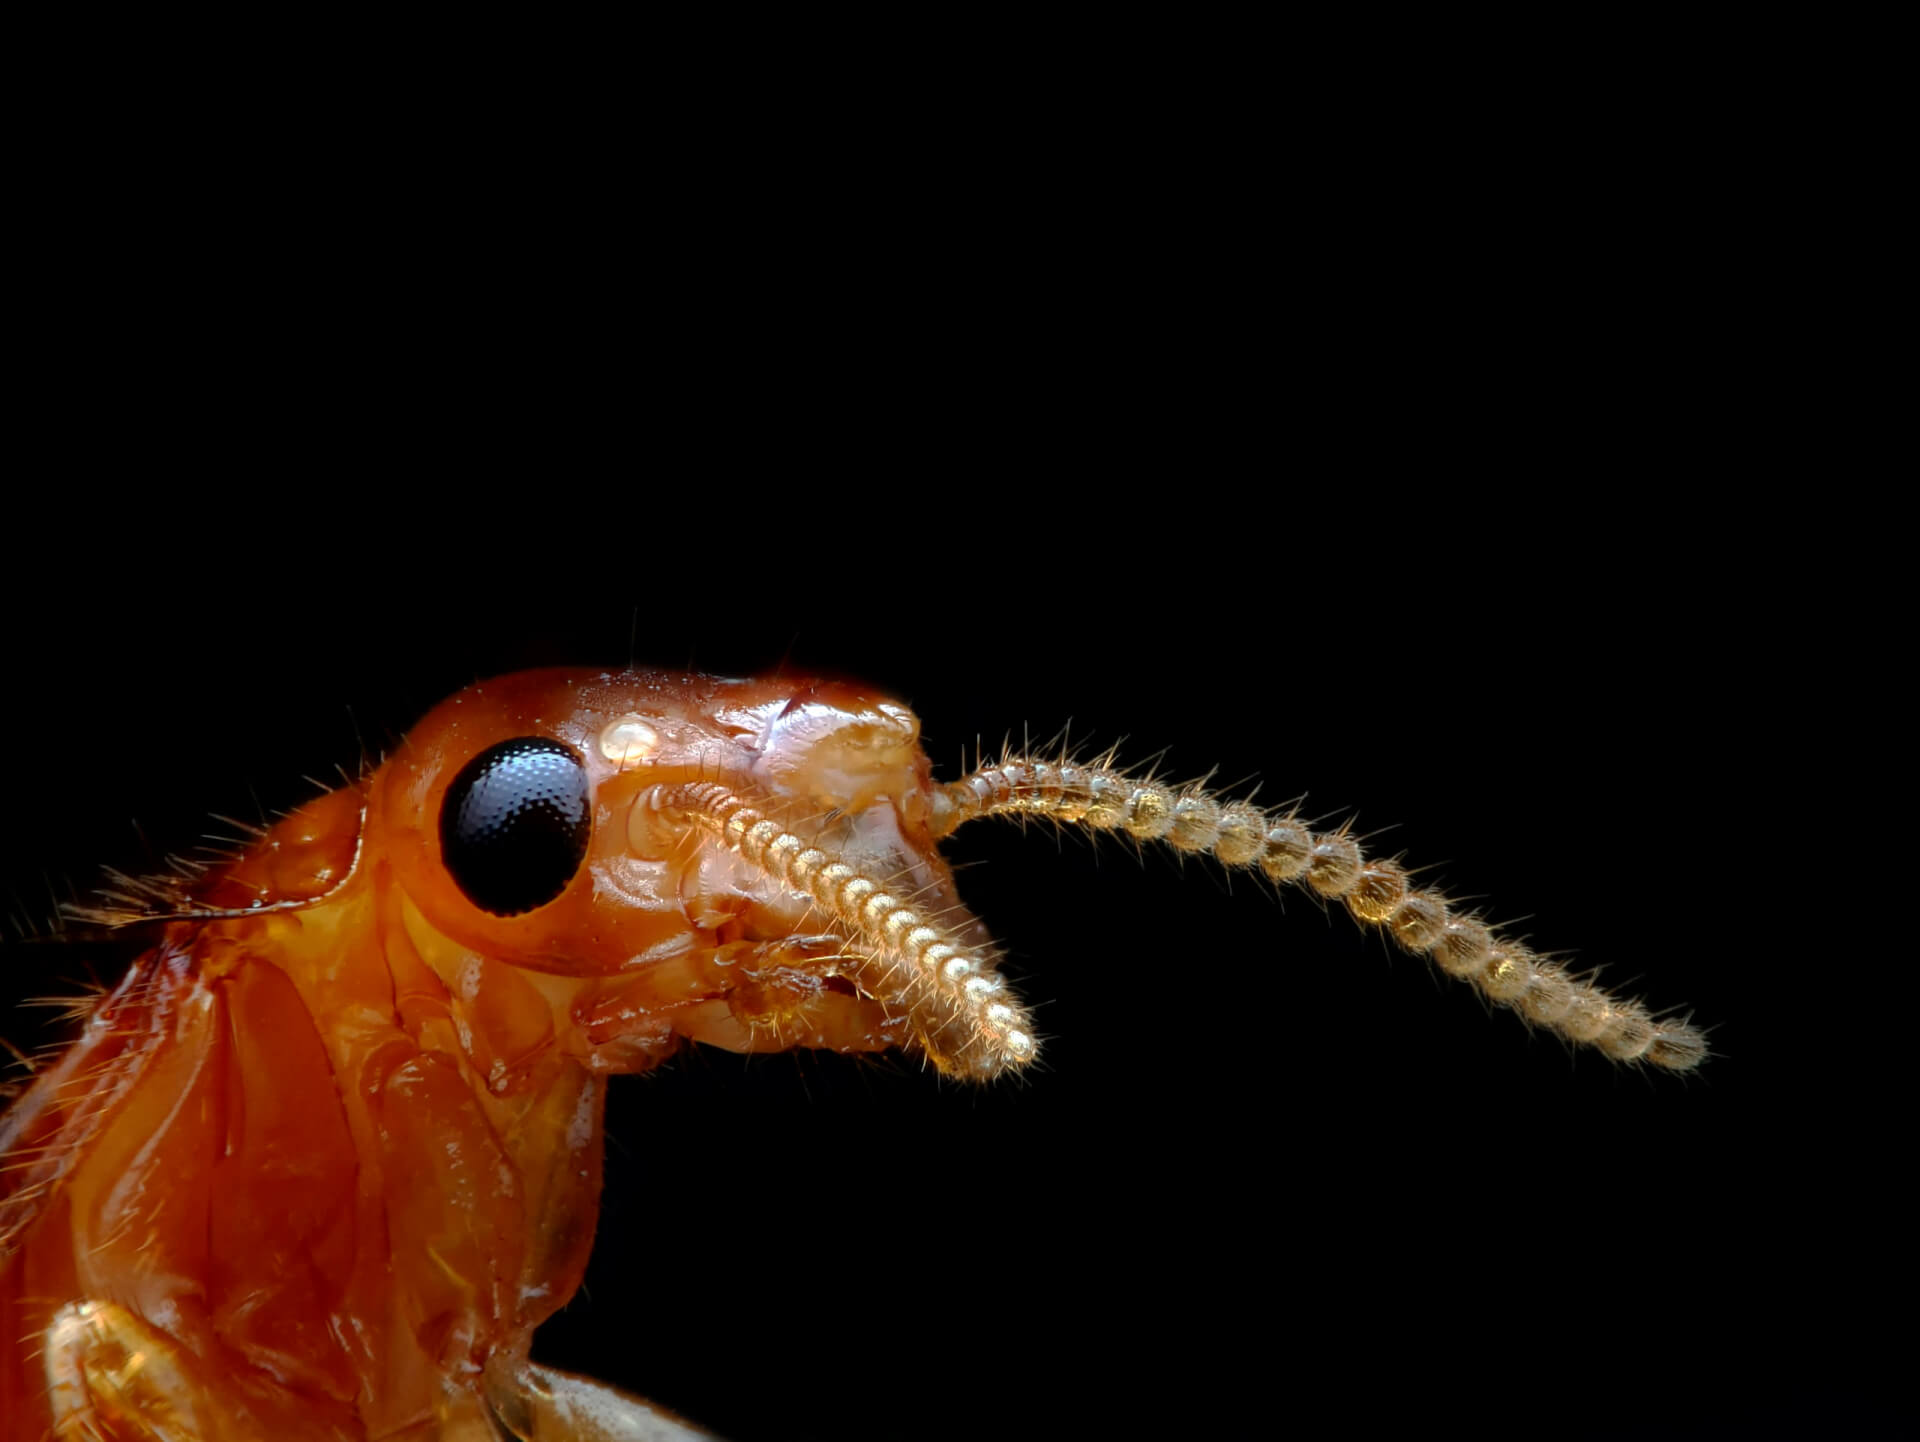 extreme closeup image of flying termite